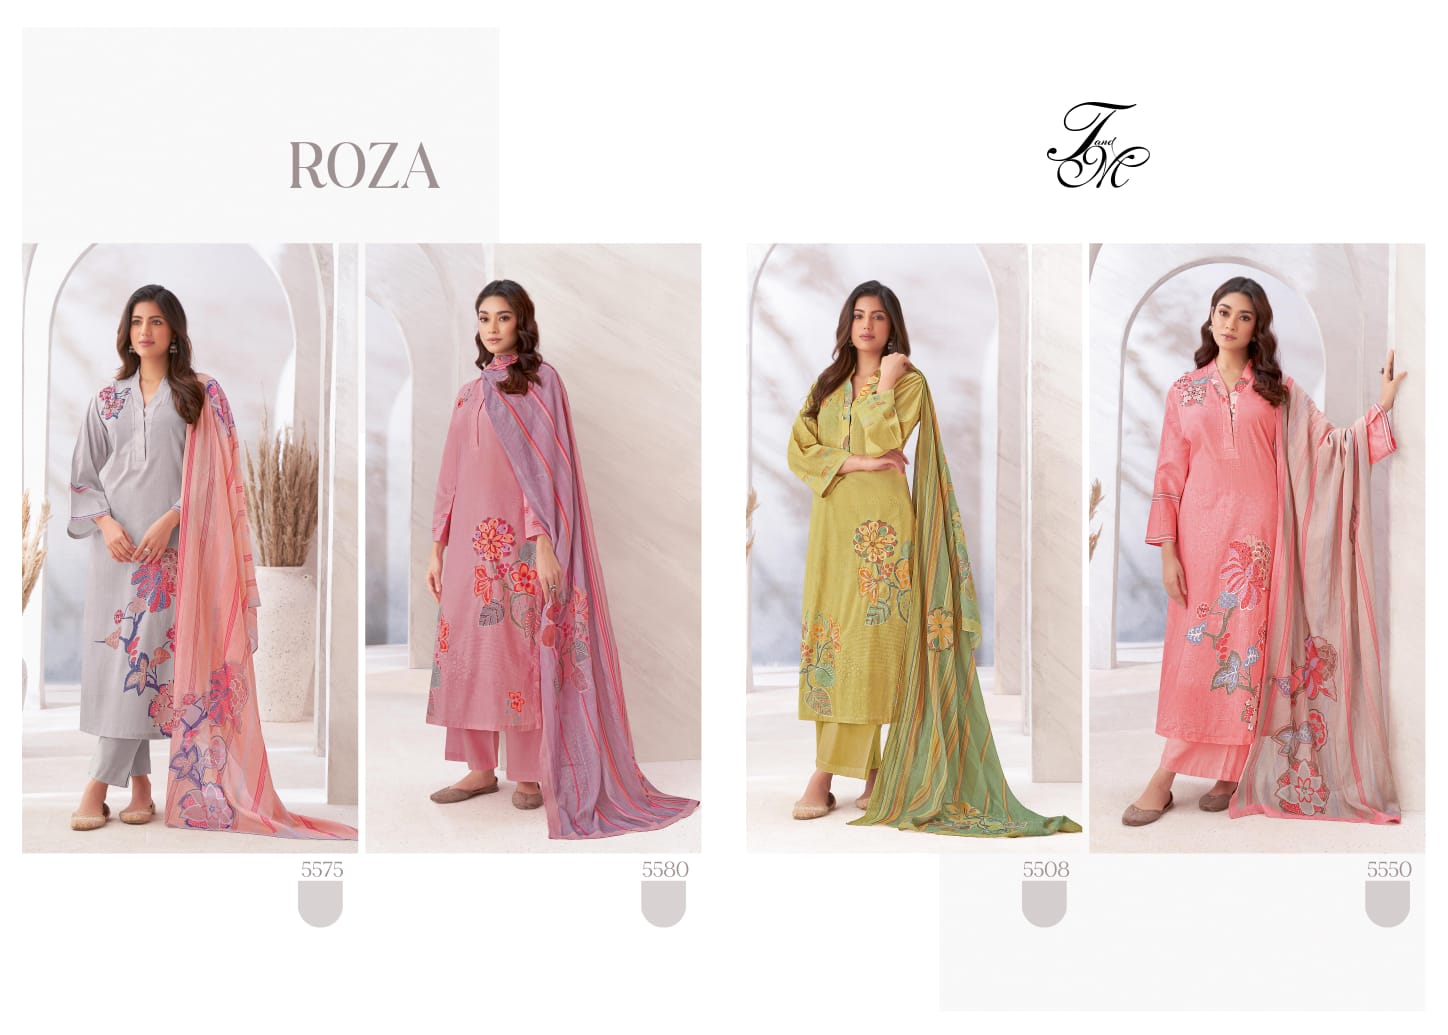 T And M Roza collection 2